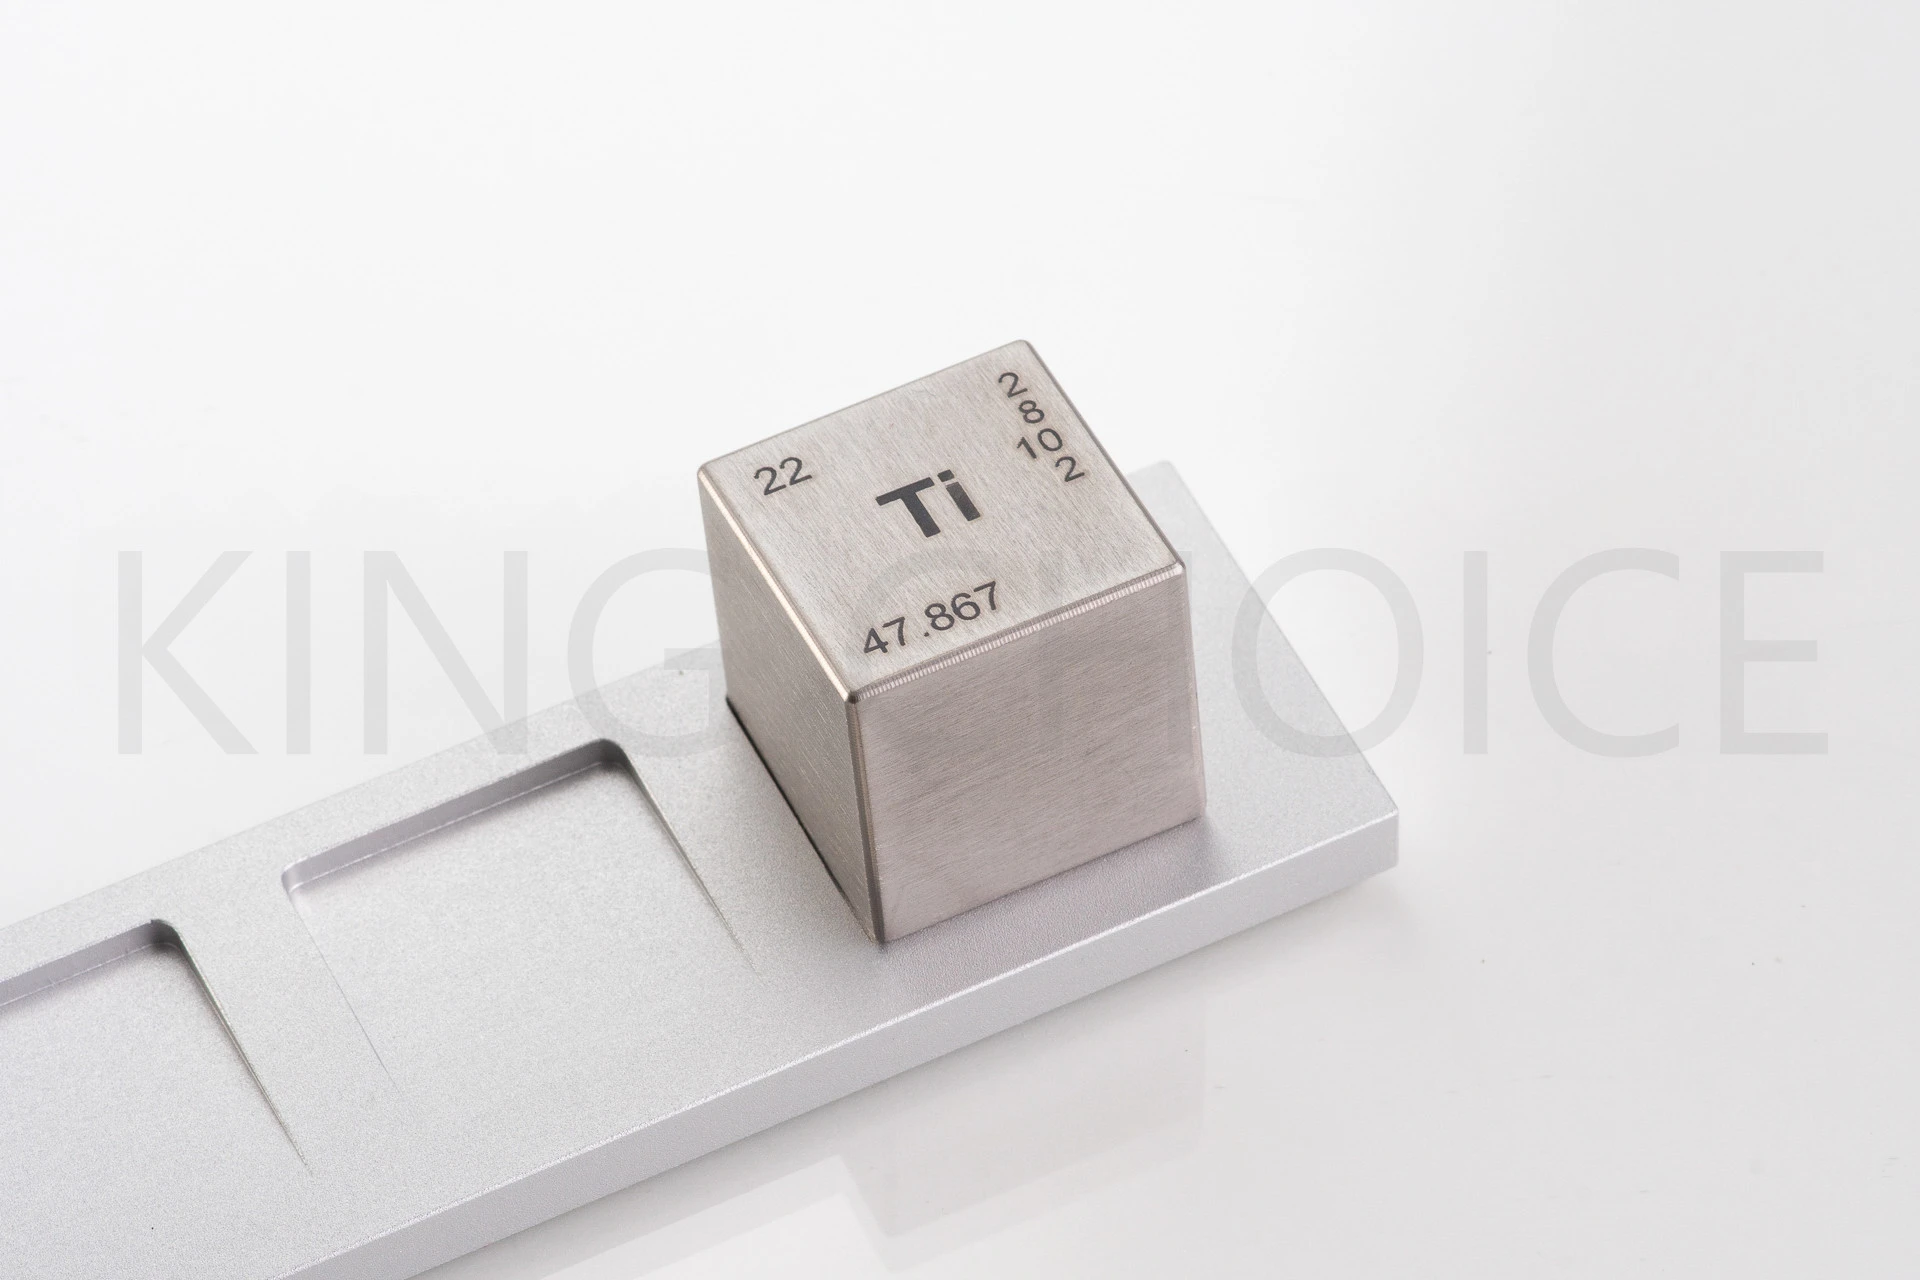 Silicon Cube Si Cube Best Selling Metal Element Cubes/ Sole Sales Agent Appointed for North America